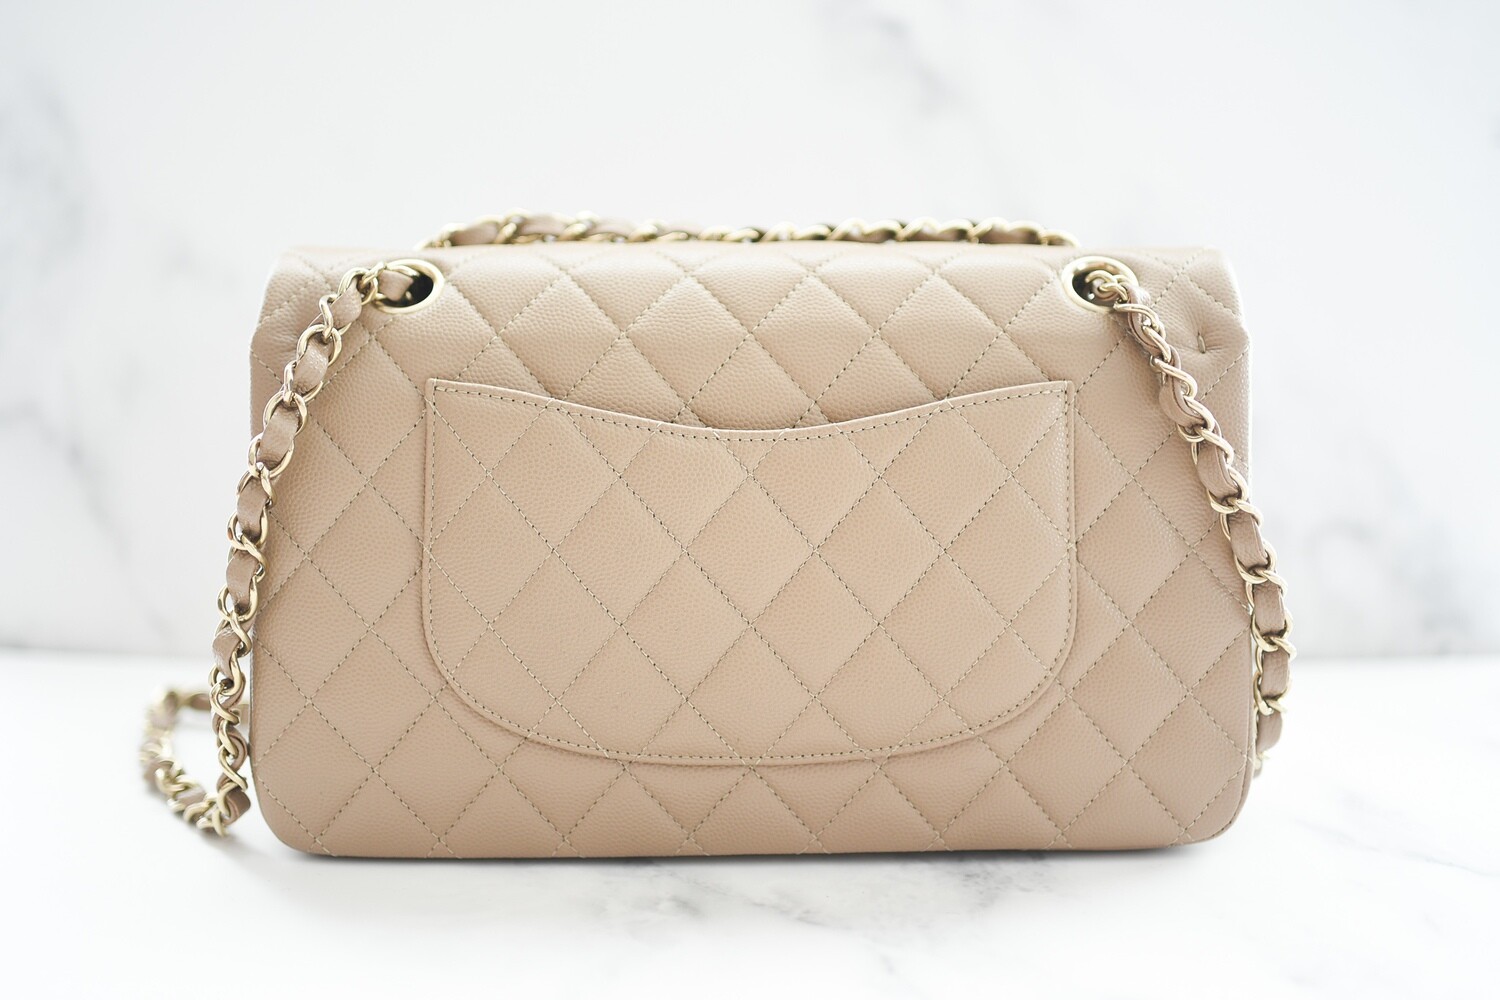 Chanel Classic Medium Double Flap, 22A Dark Beige Caviar Leather with Gold  Hardware, New in Box